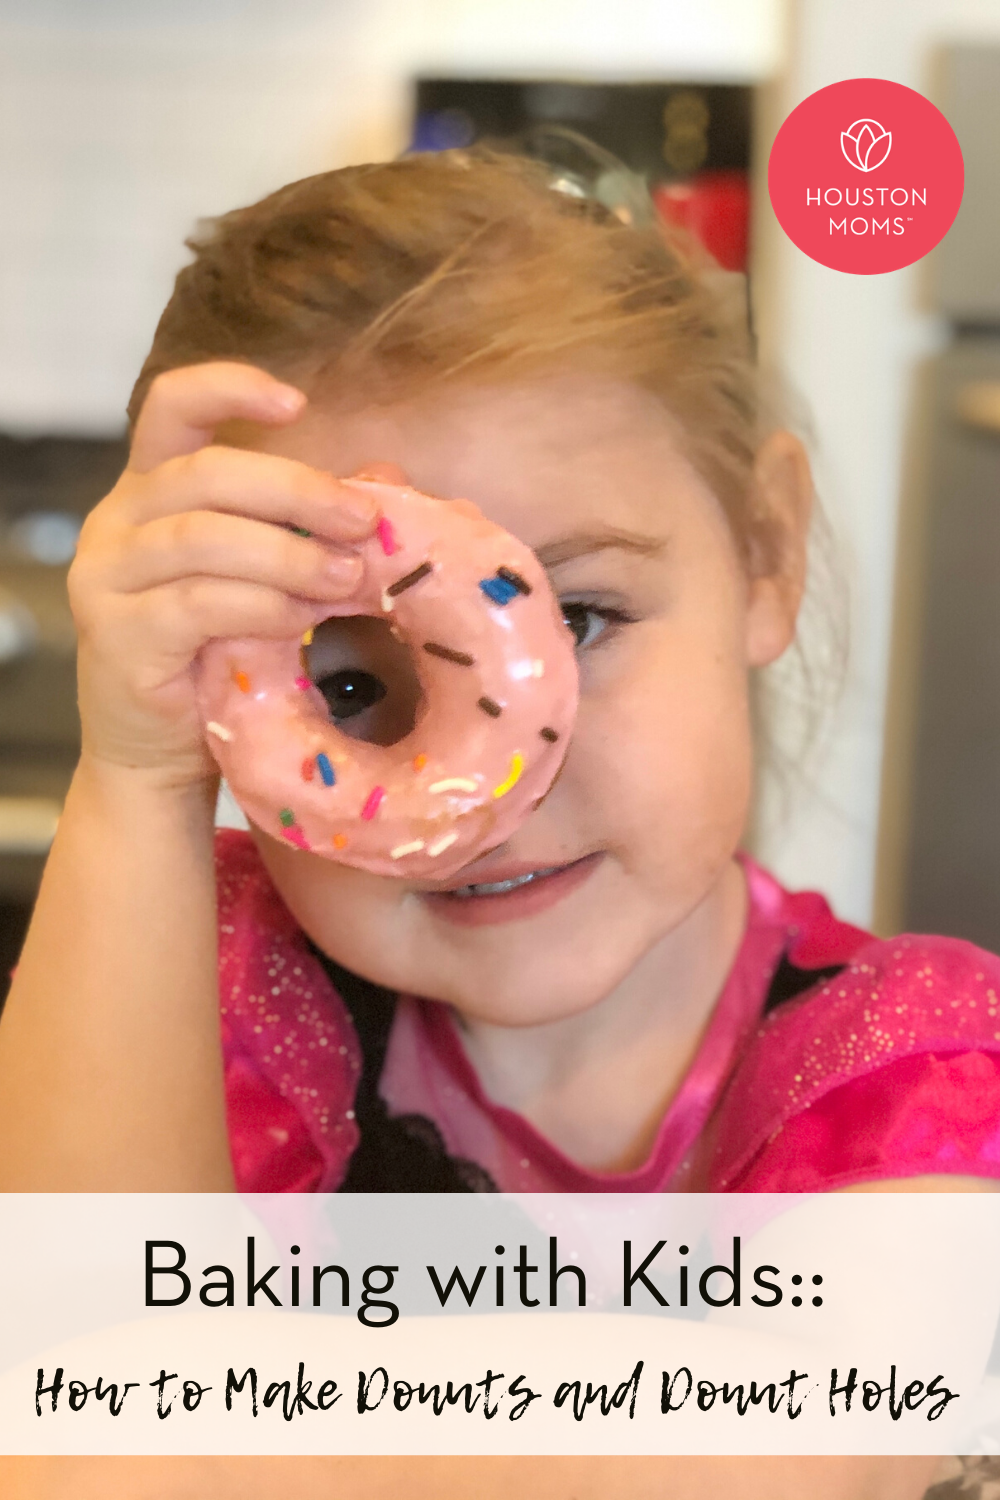 Houston Moms "Baking with Kids:: How to Make Donuts and Donut Holes" #houstonmoms #houstonmomsblog #momsaroundhouston